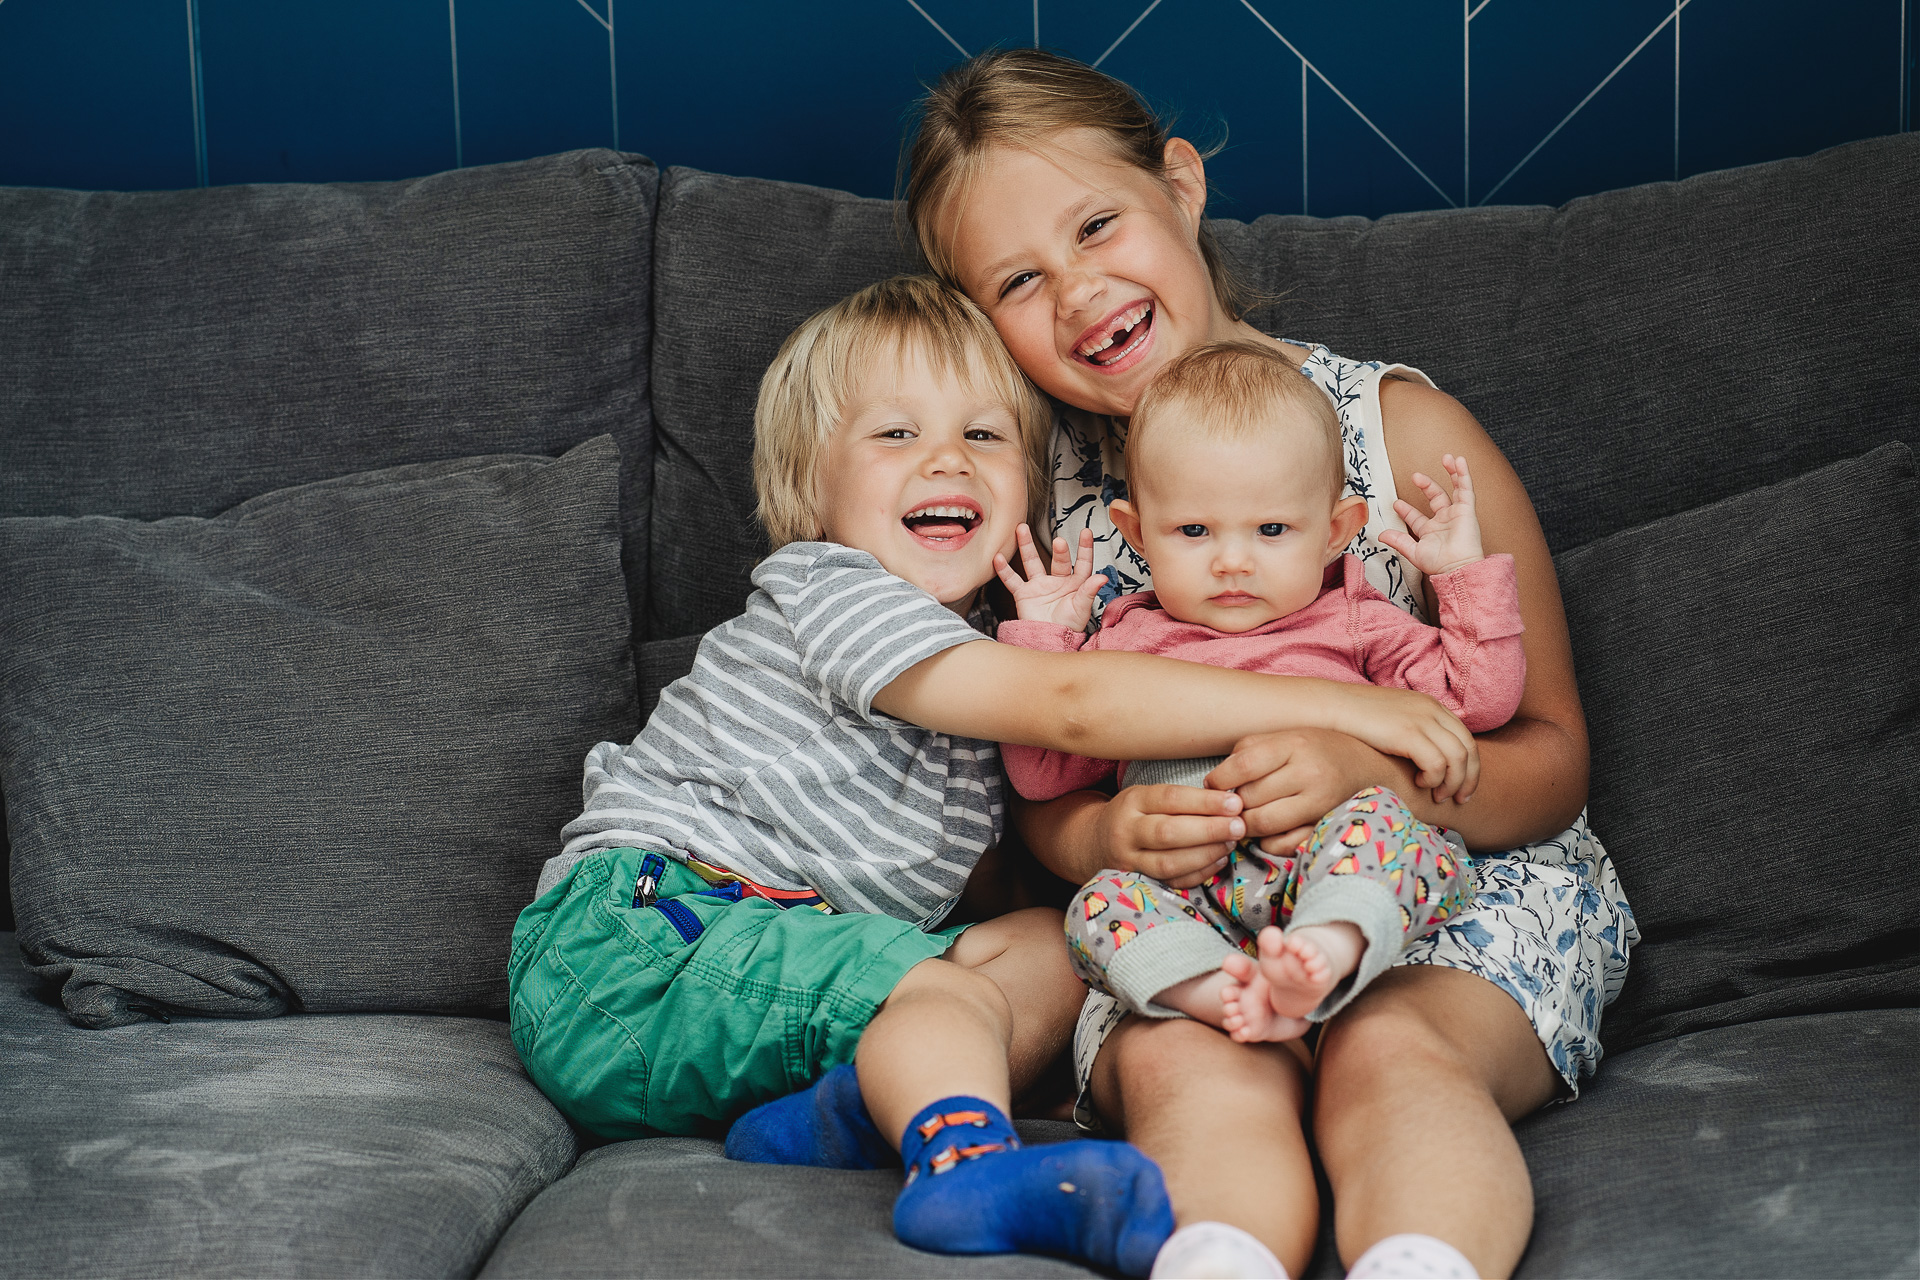 Family photography at home, three children on a sofa together